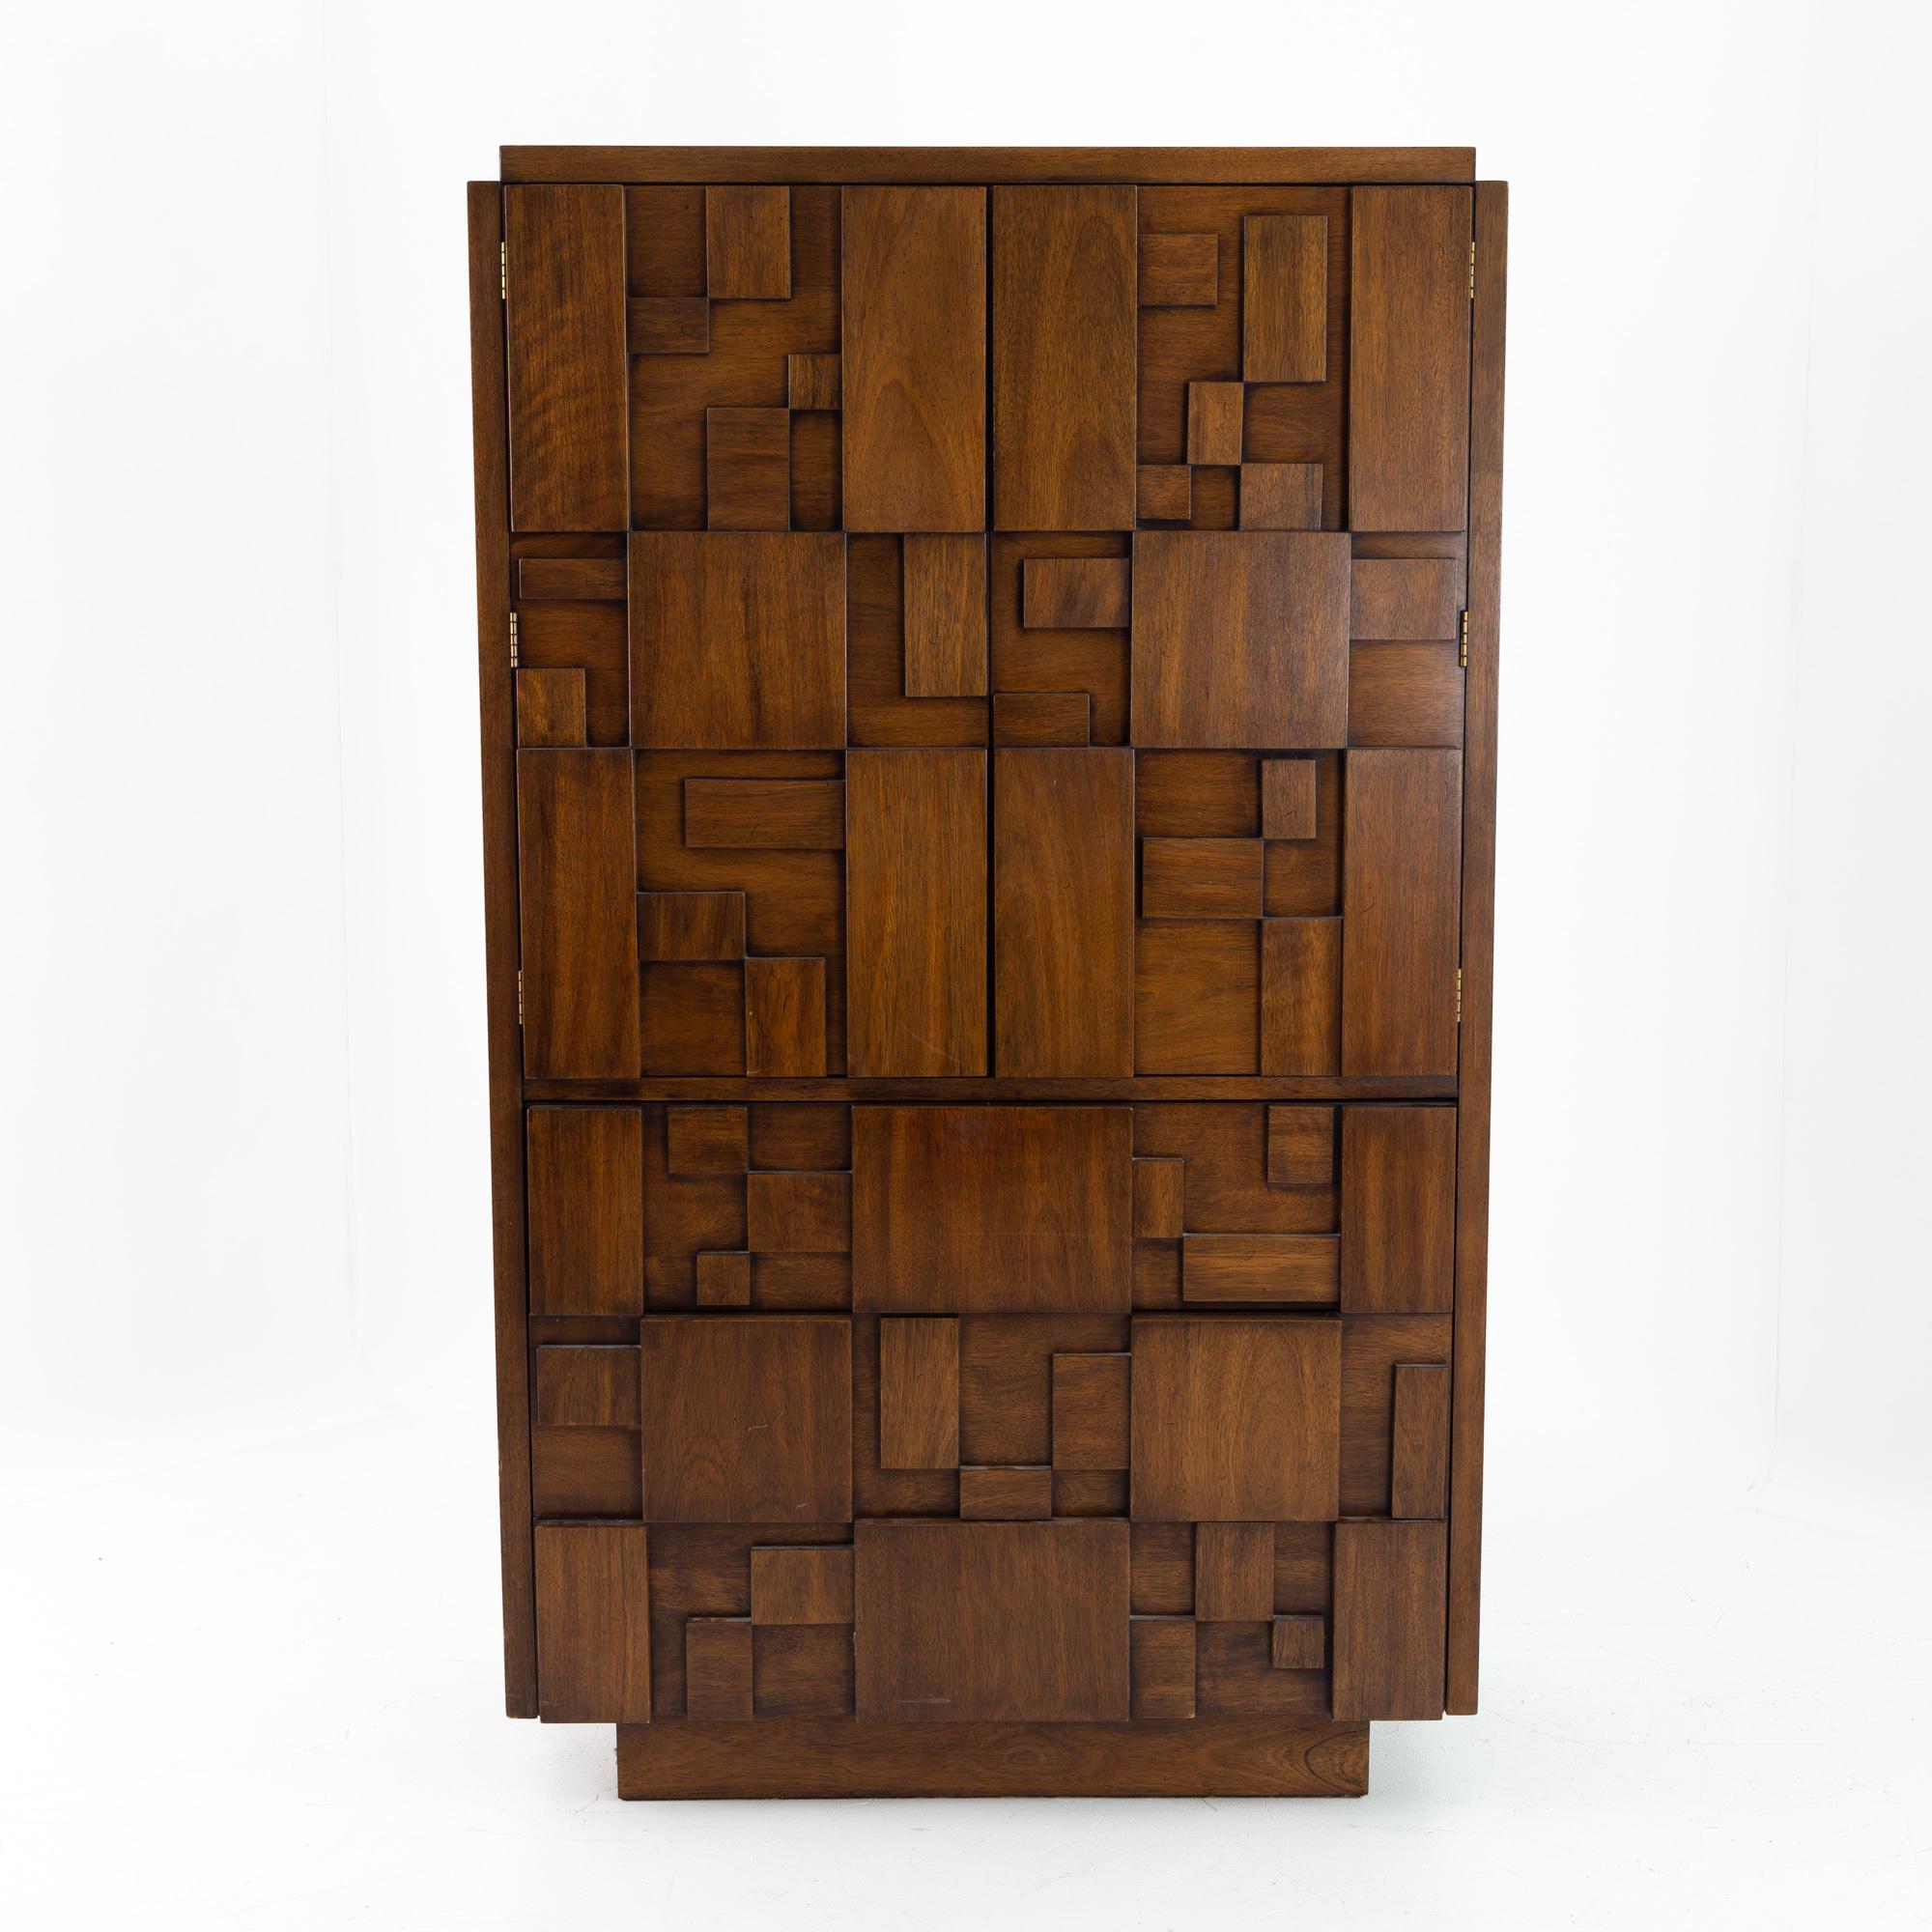 Paul Evans style lane Brutalist Mid Century highboy armoire chest
Measures: 38 wide x 19 deep x 64.25 high

This price includes getting this piece in what we call restored vintage condition. That means the piece is permanently fixed upon purchase so